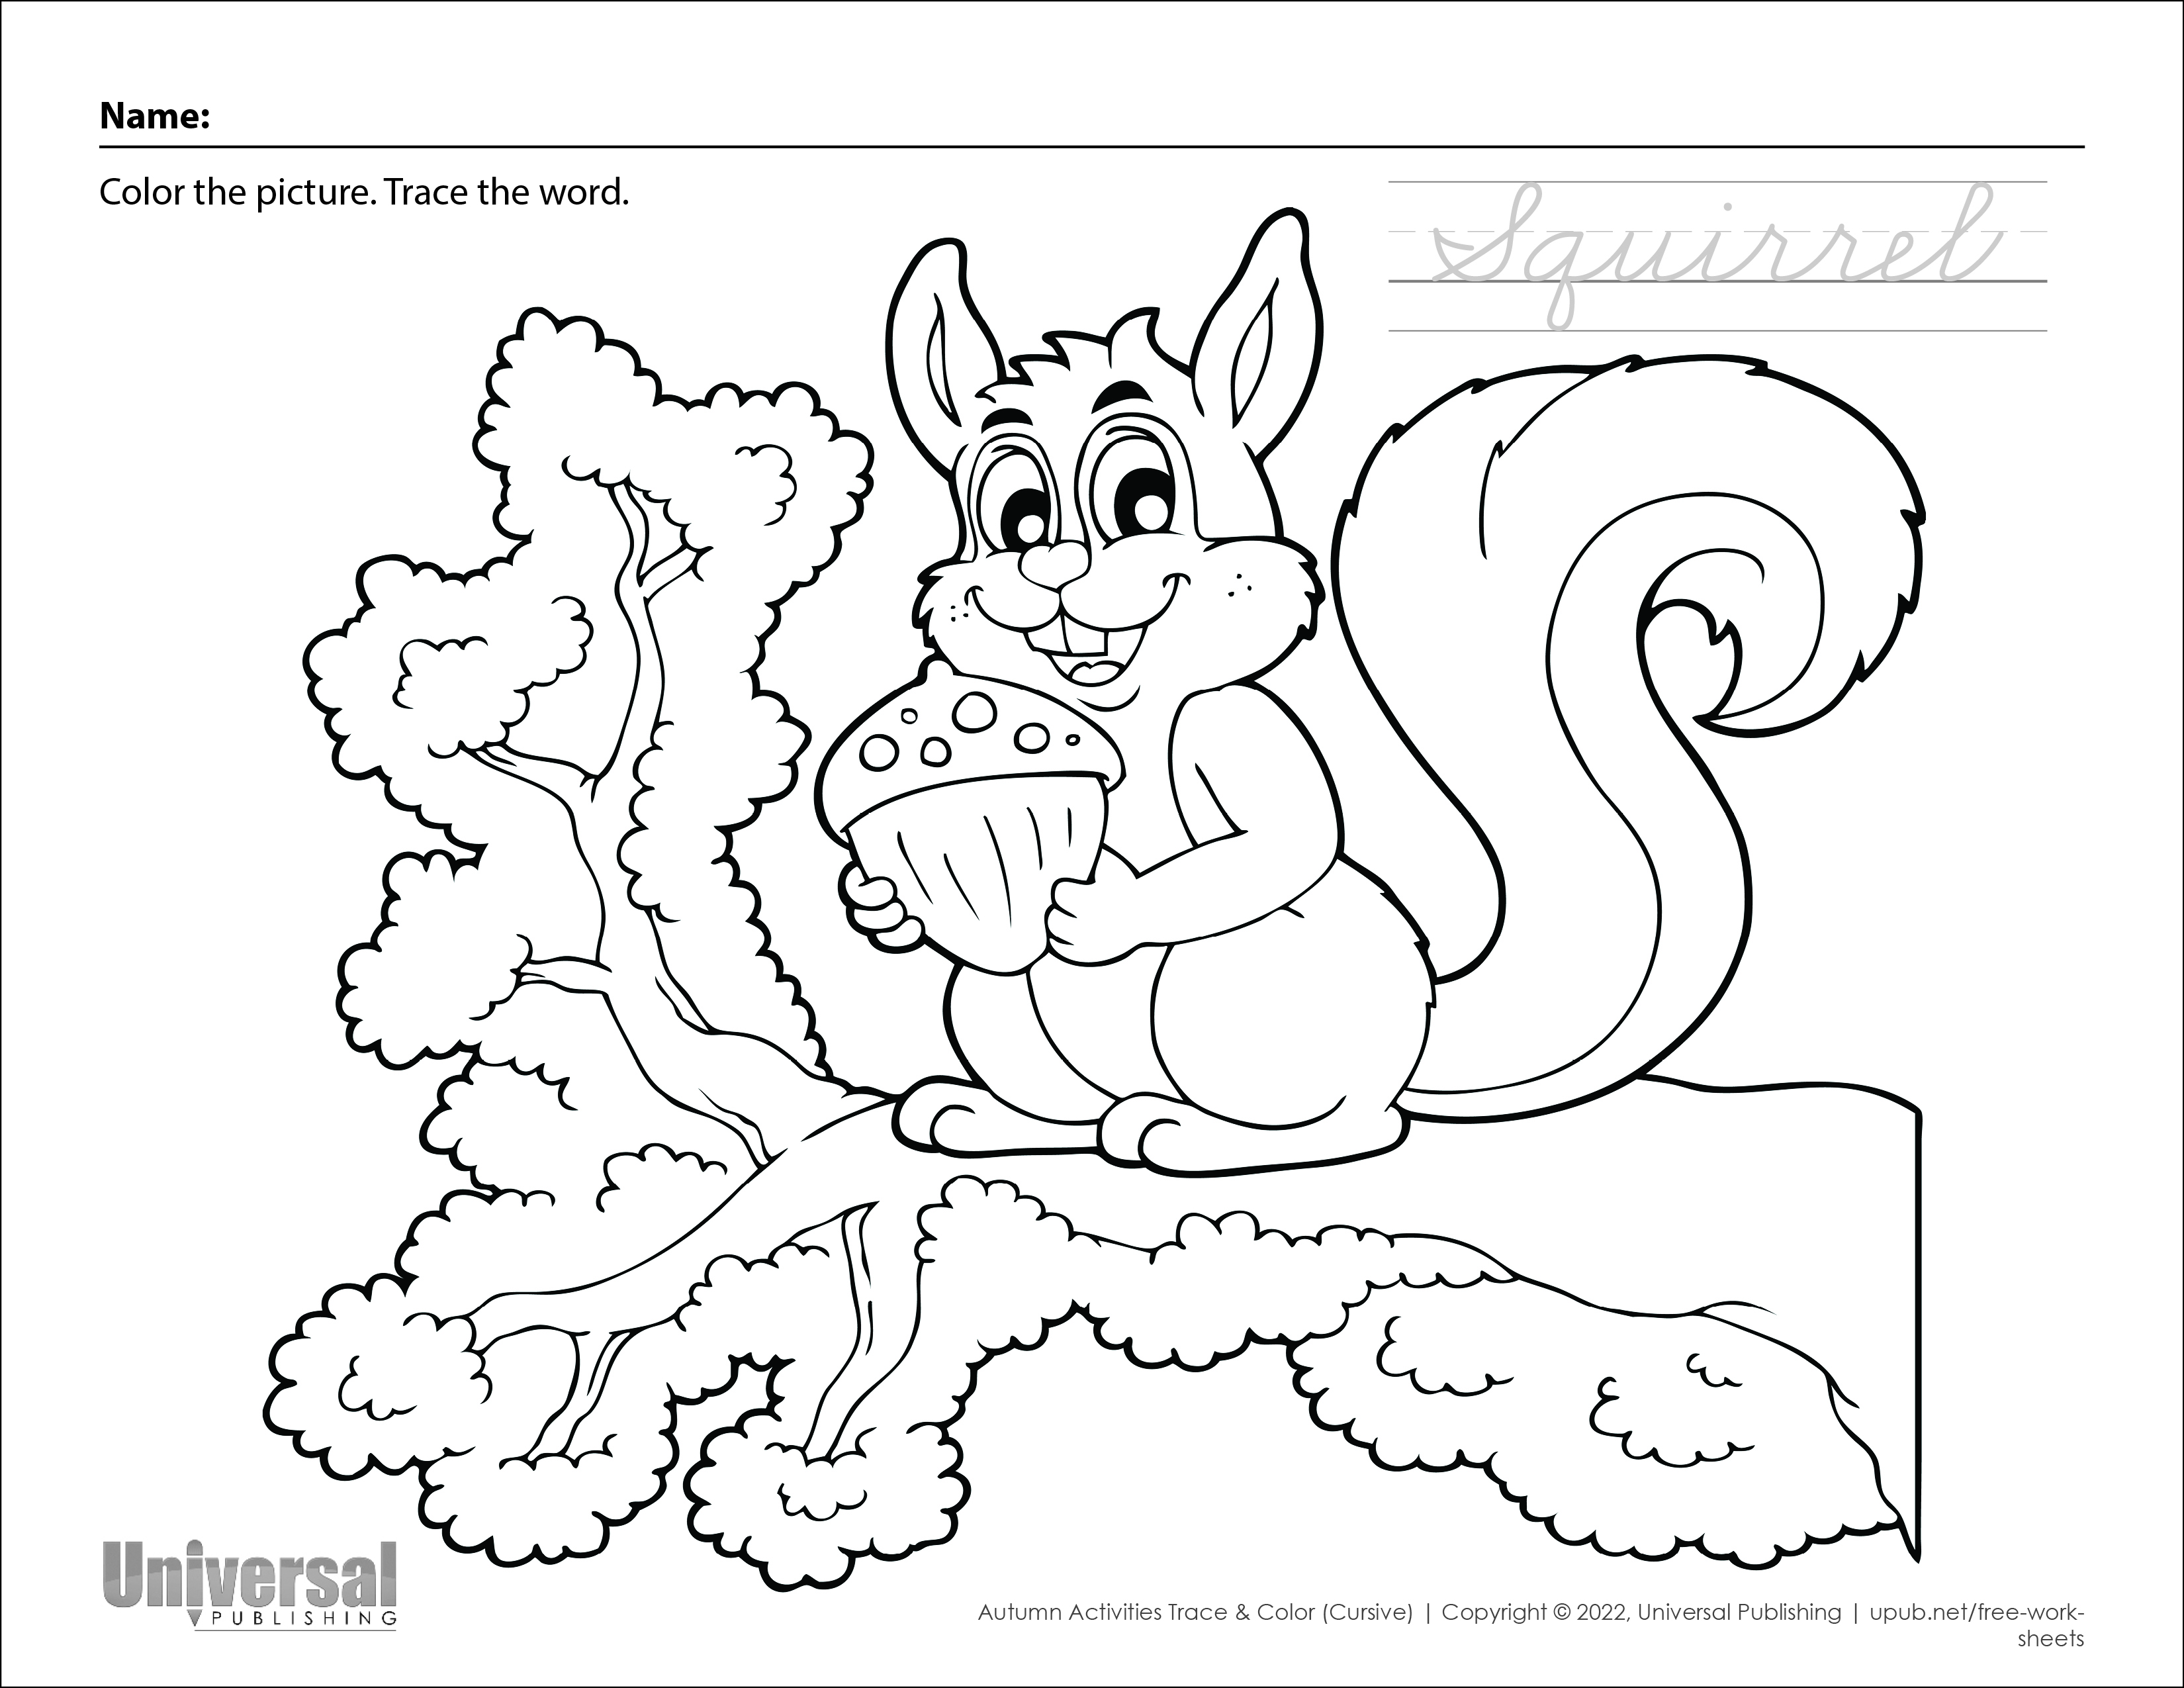 Fall Squirrel Color and Trace Cursive Activity